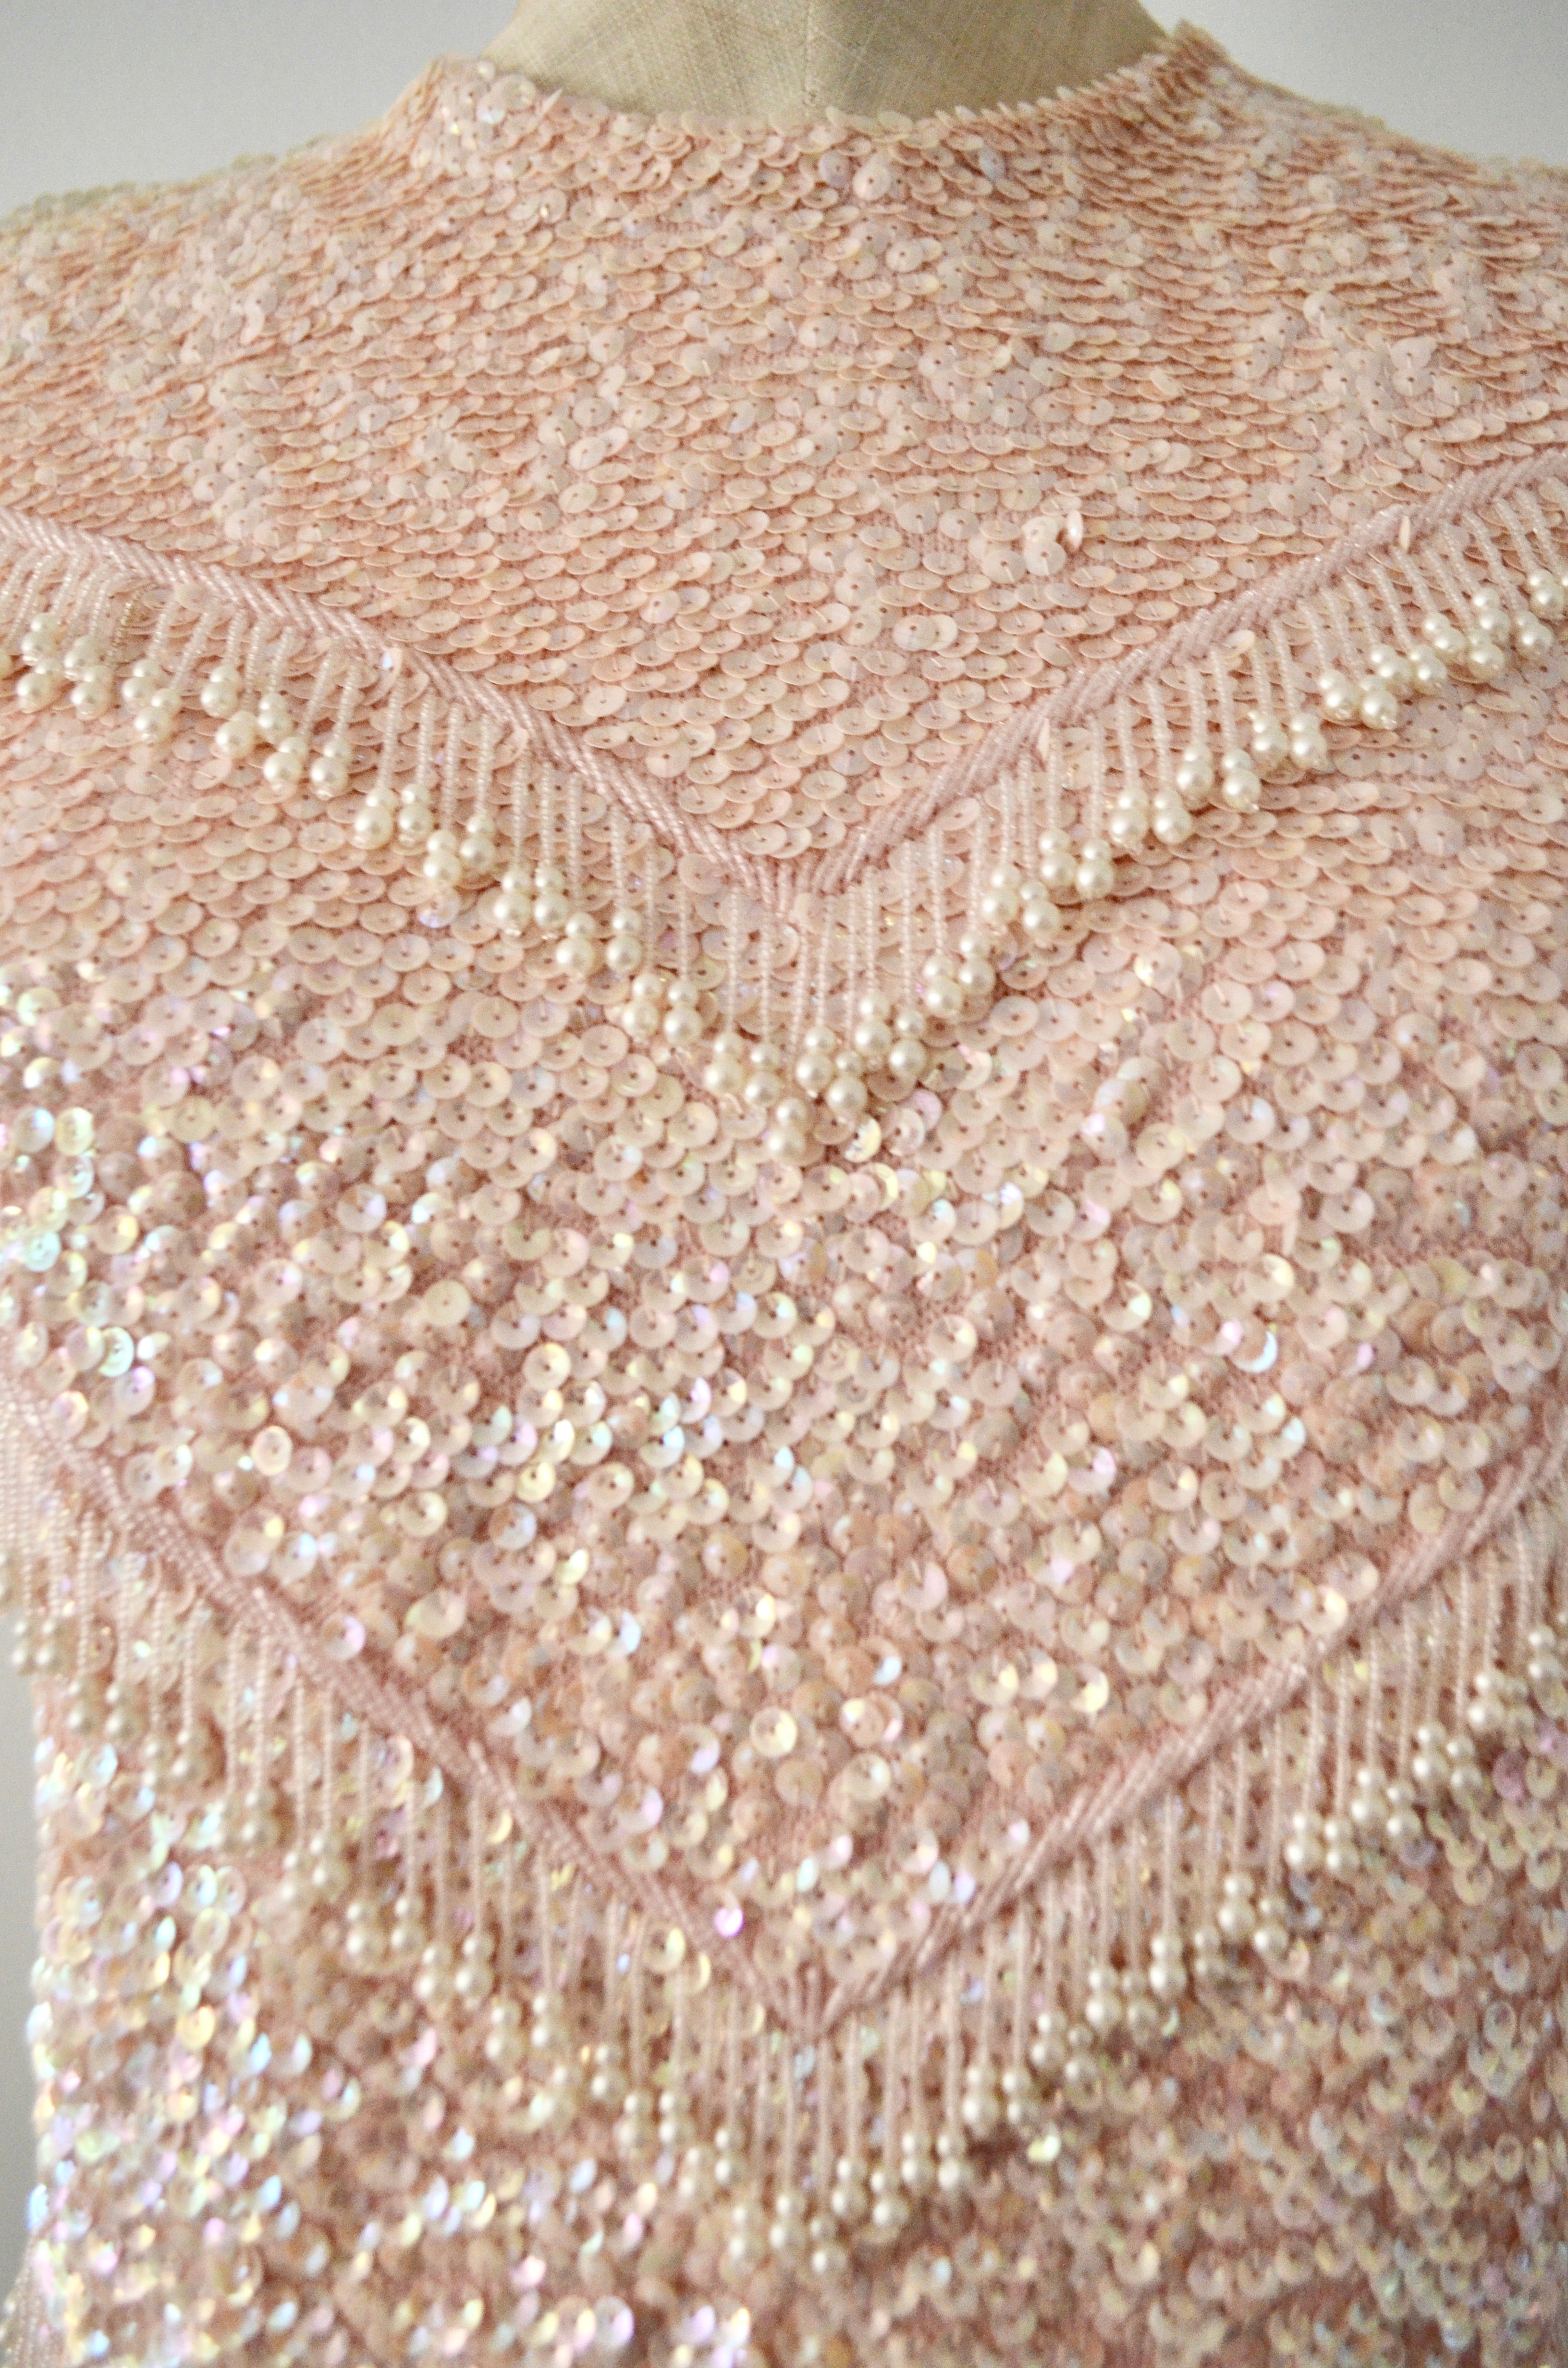 Pastel Pink Miami Boutique Womens Beaded Sequined Wool Sweater Sleeveless Vest Top Blouse M